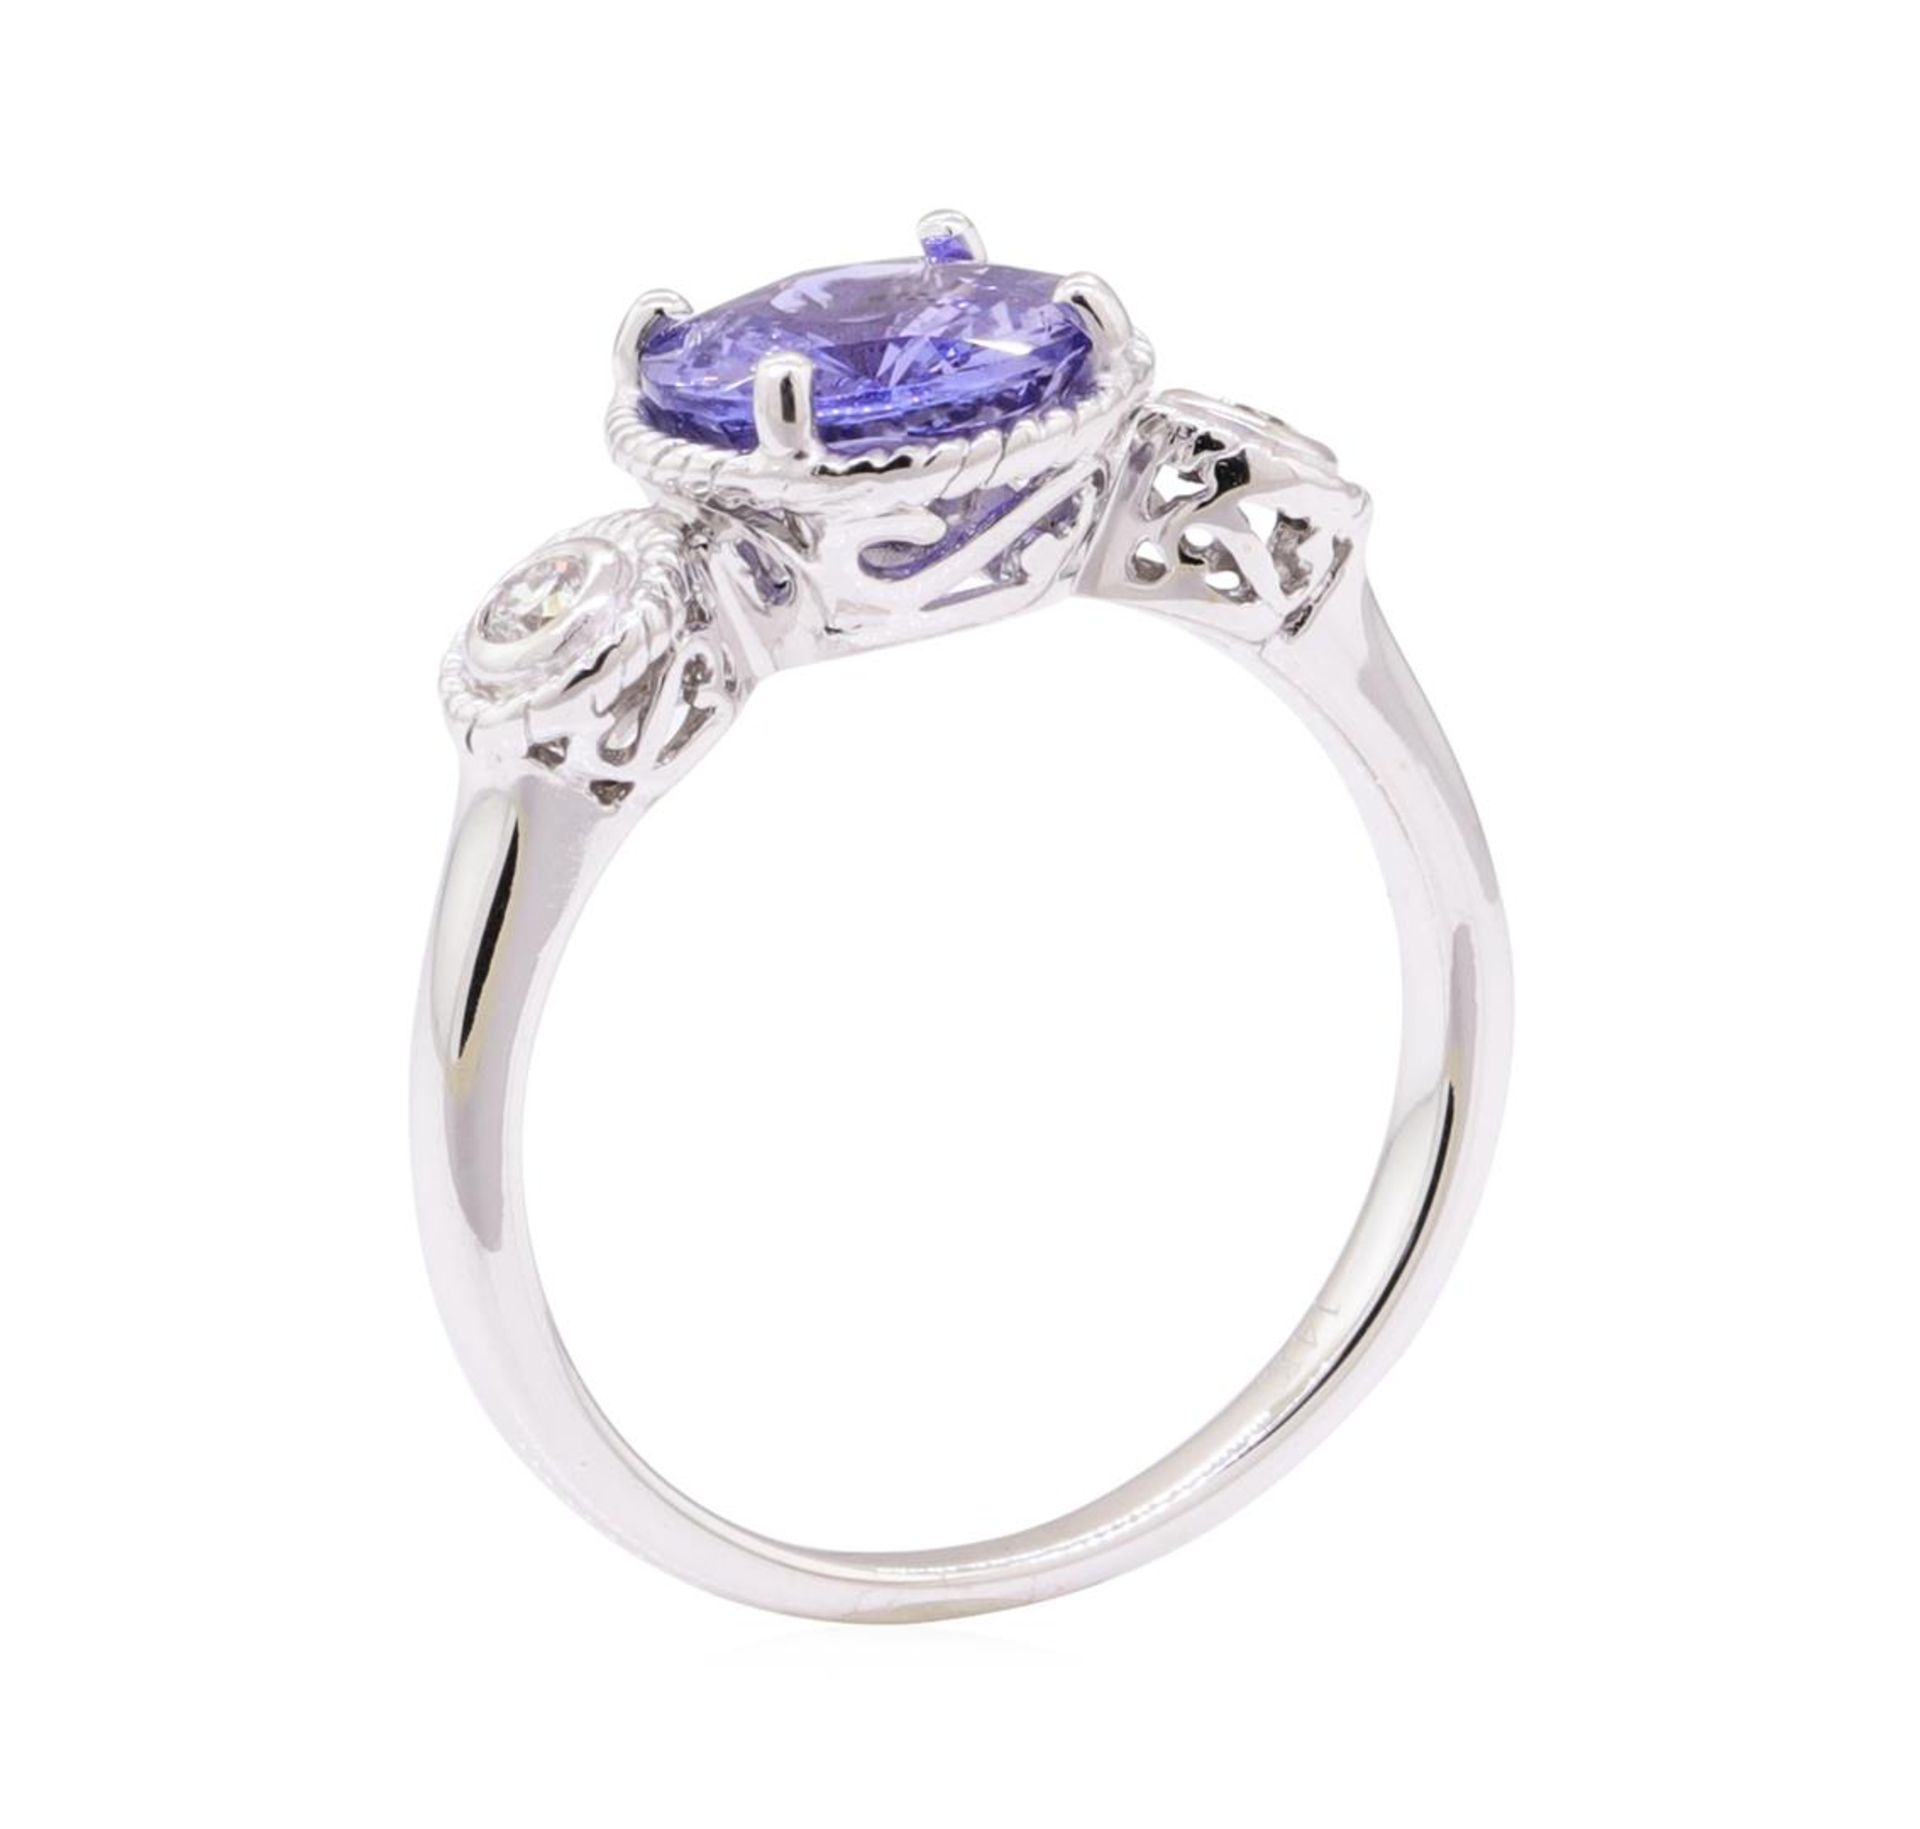 2.08ctw Blue Sapphire and Diamond Ring - 14KT White Gold - Image 4 of 4